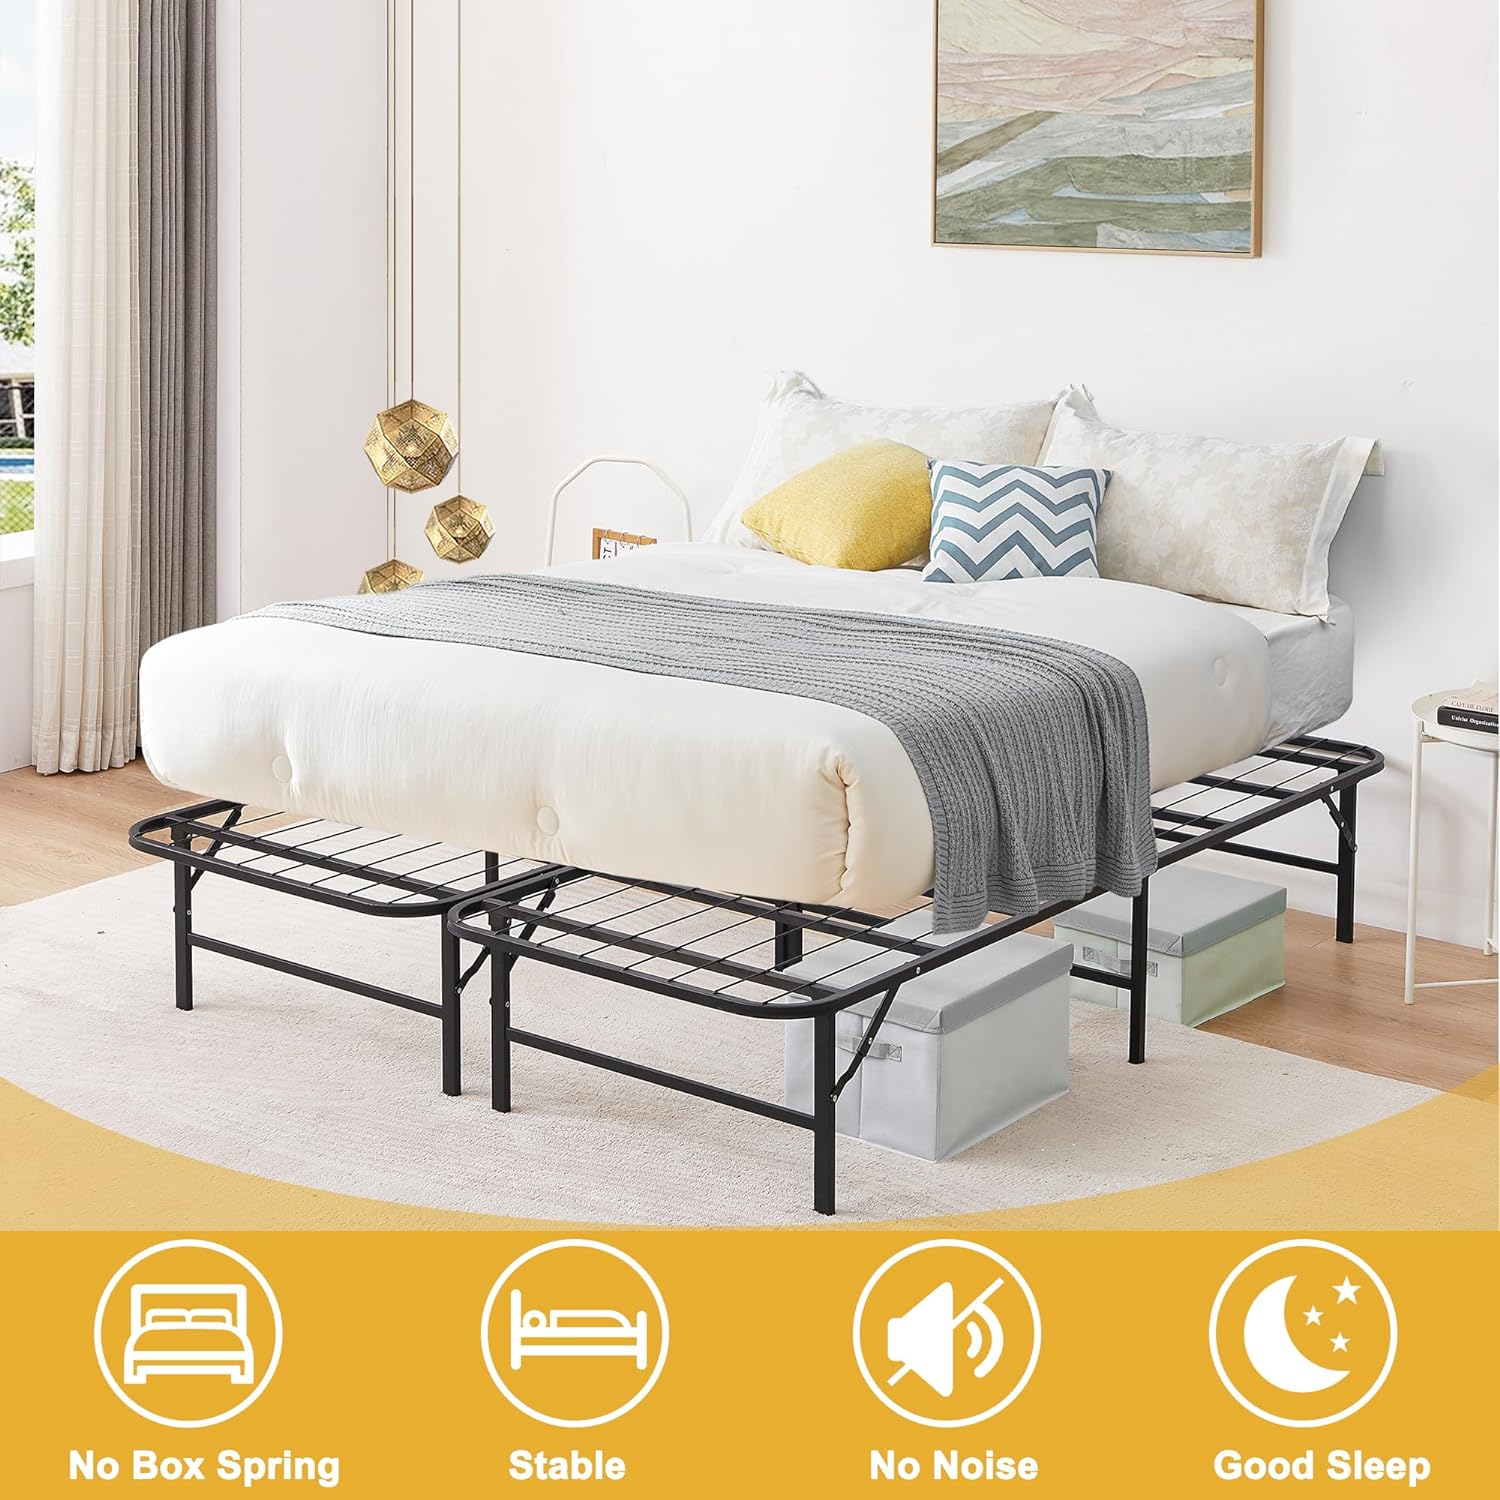 VECELO Metal Folding Bed Frame No Tools Required